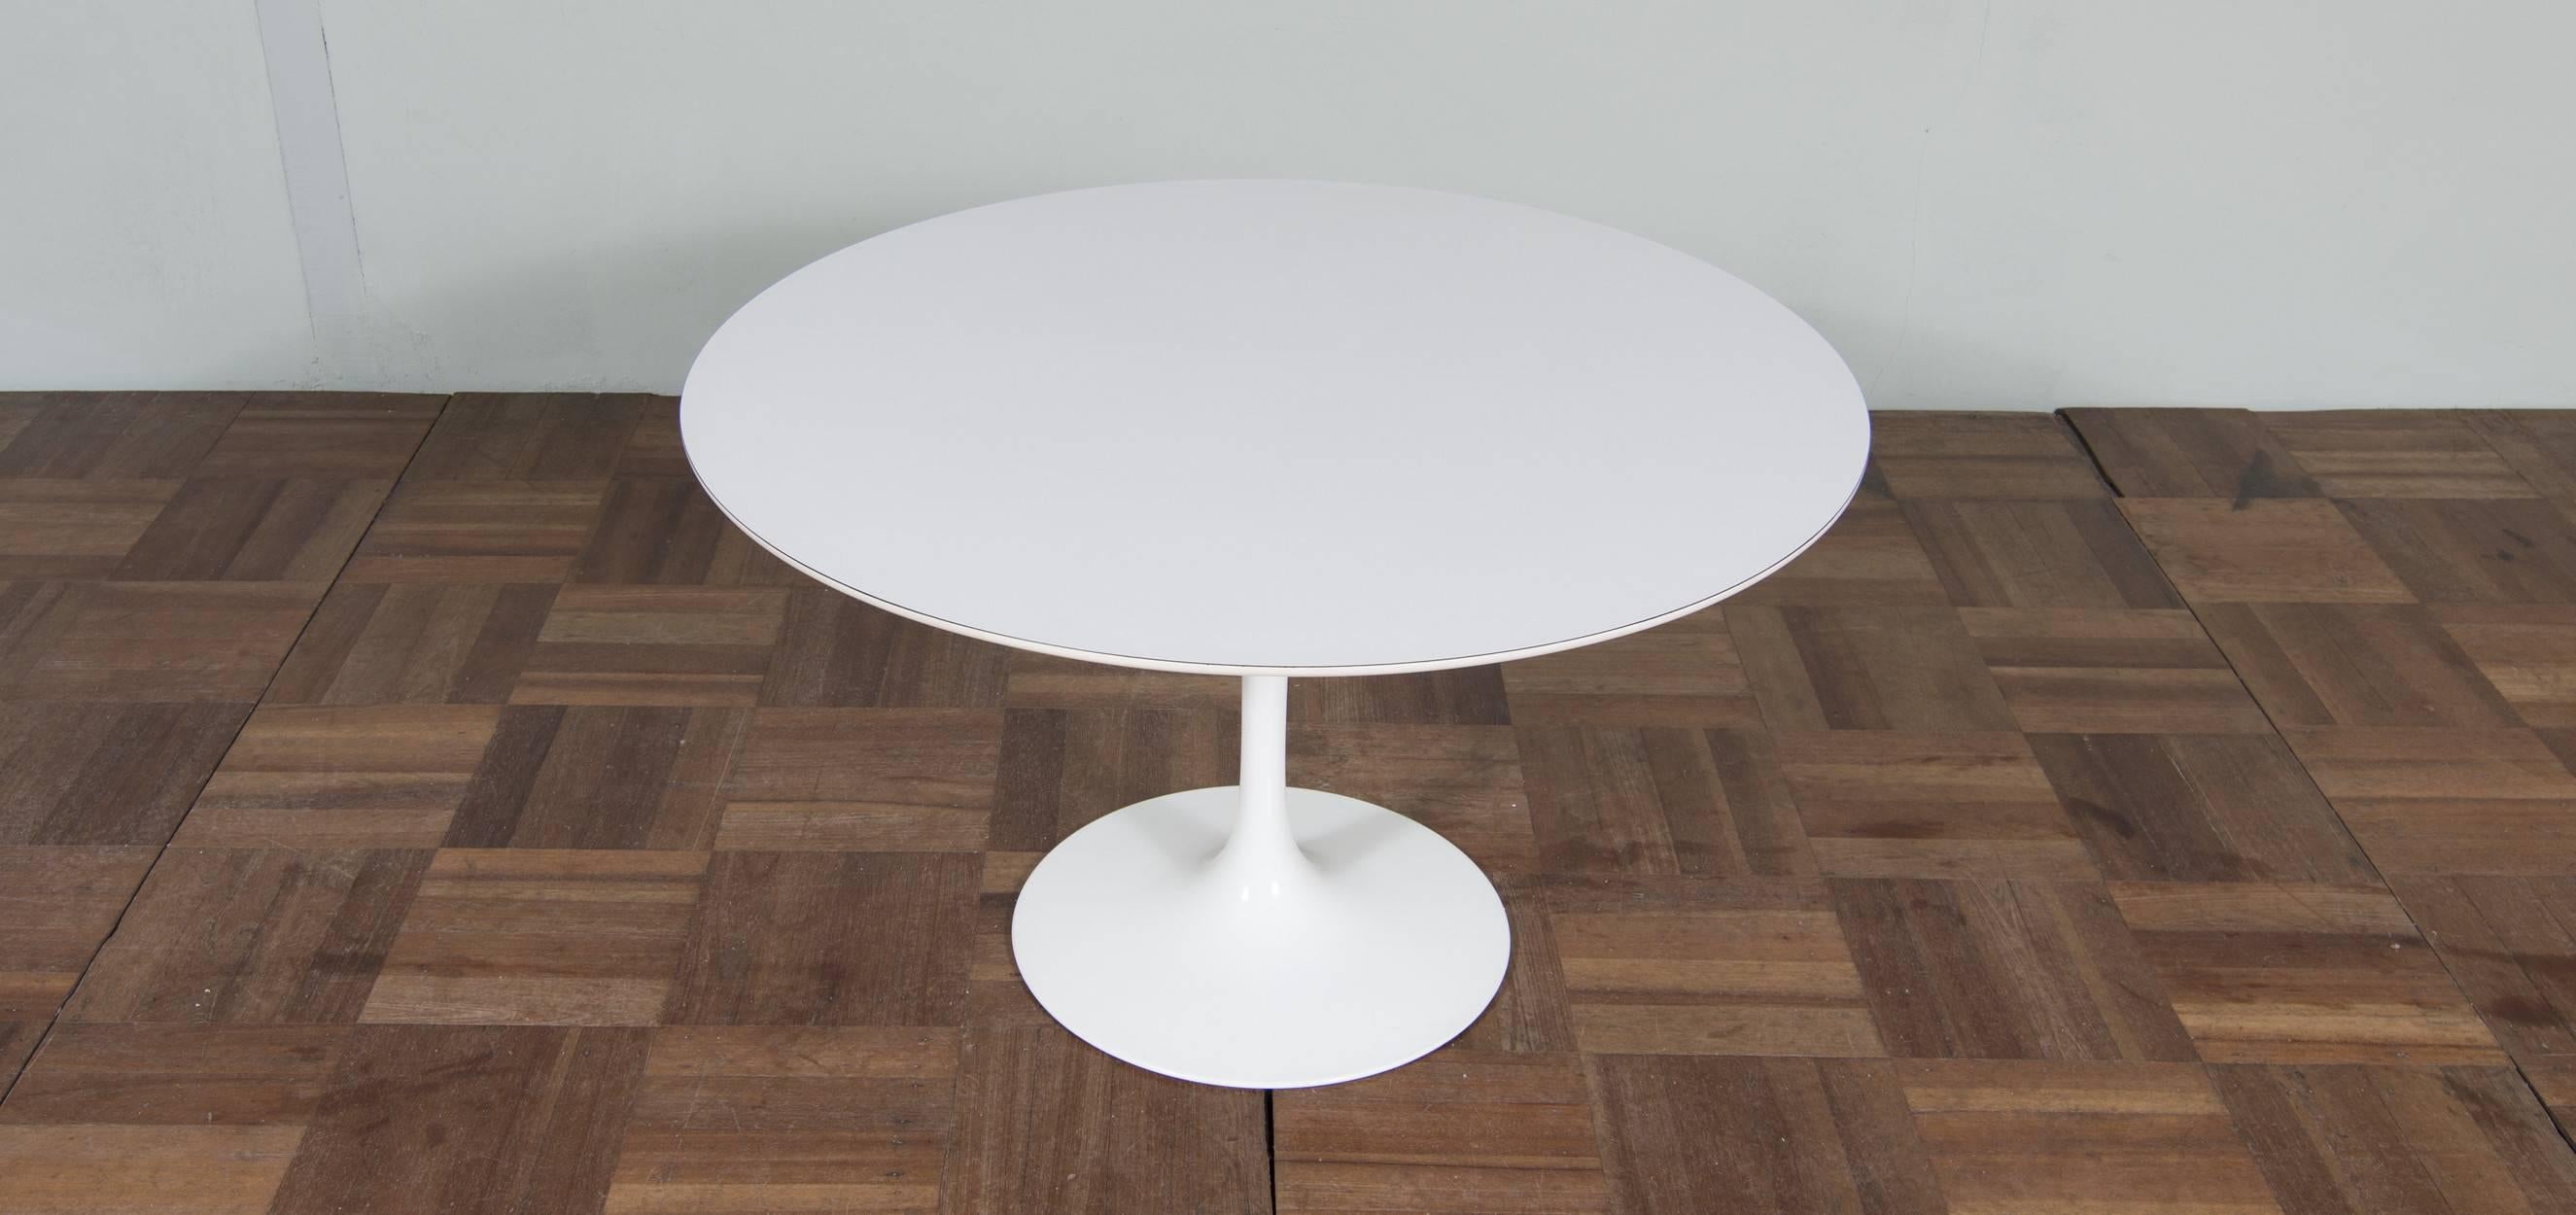 Vintage Eero Saarinen tulip coffee table designed in the 1950s

Vintage Eero Saarinen tulip coffee table with white laminated top. The table is produced by Knoll International and designed by Eero Saarinen in the 1950s.

Eero Saarinen was a